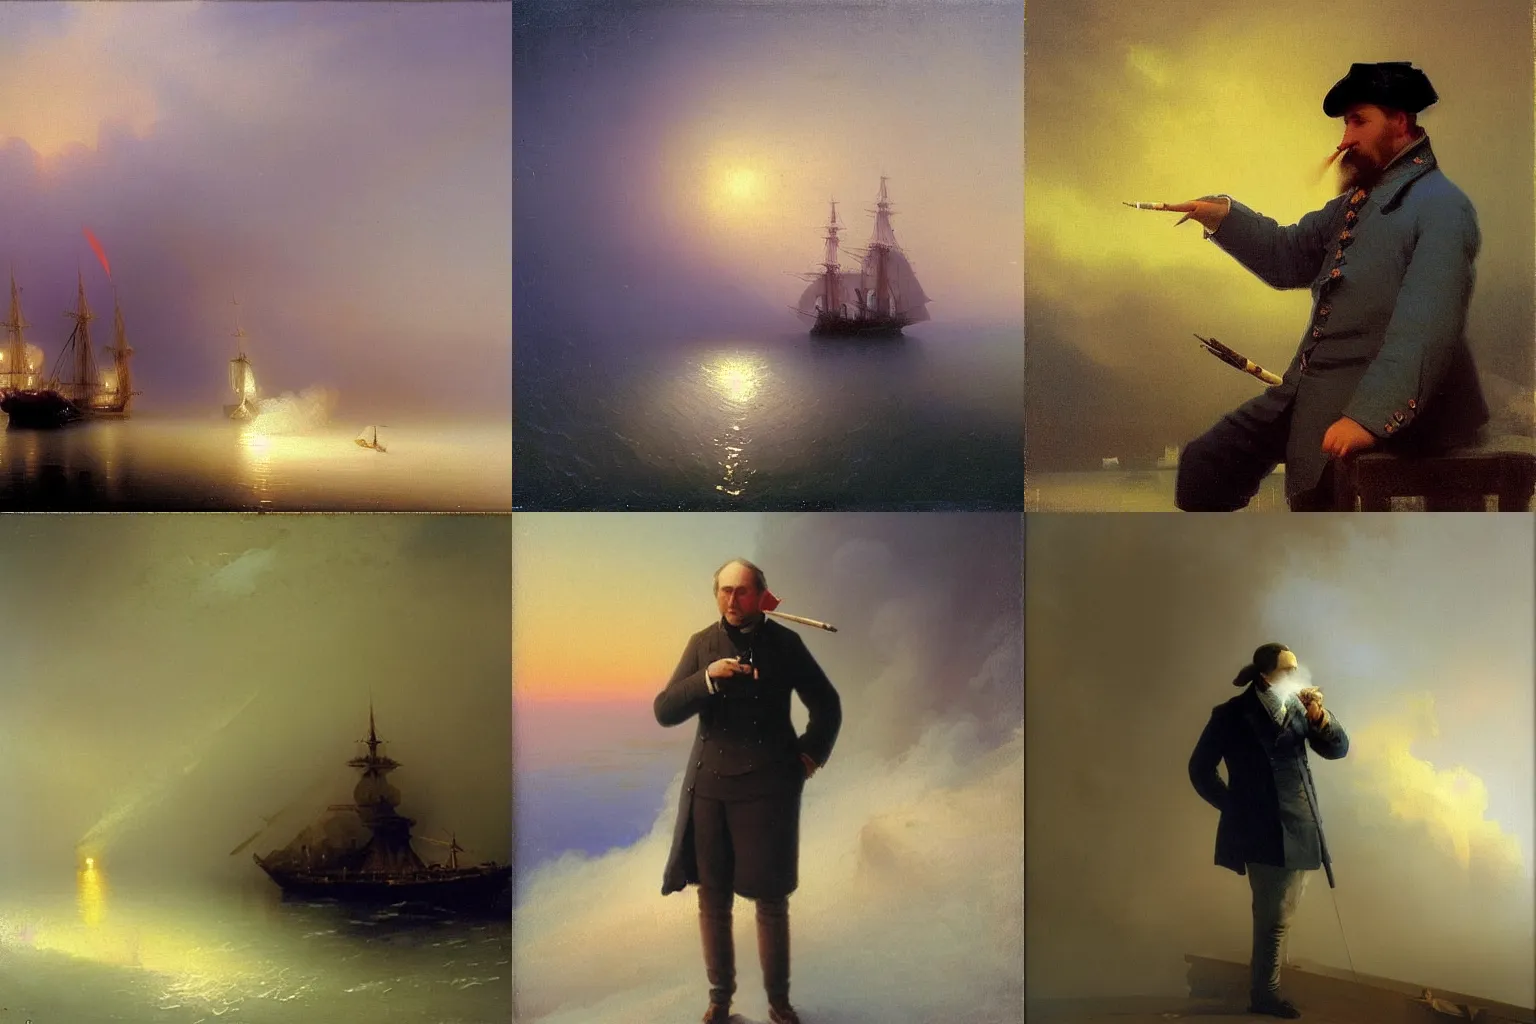 Prompt: Aivazovsky is smoking cigarette in a corner